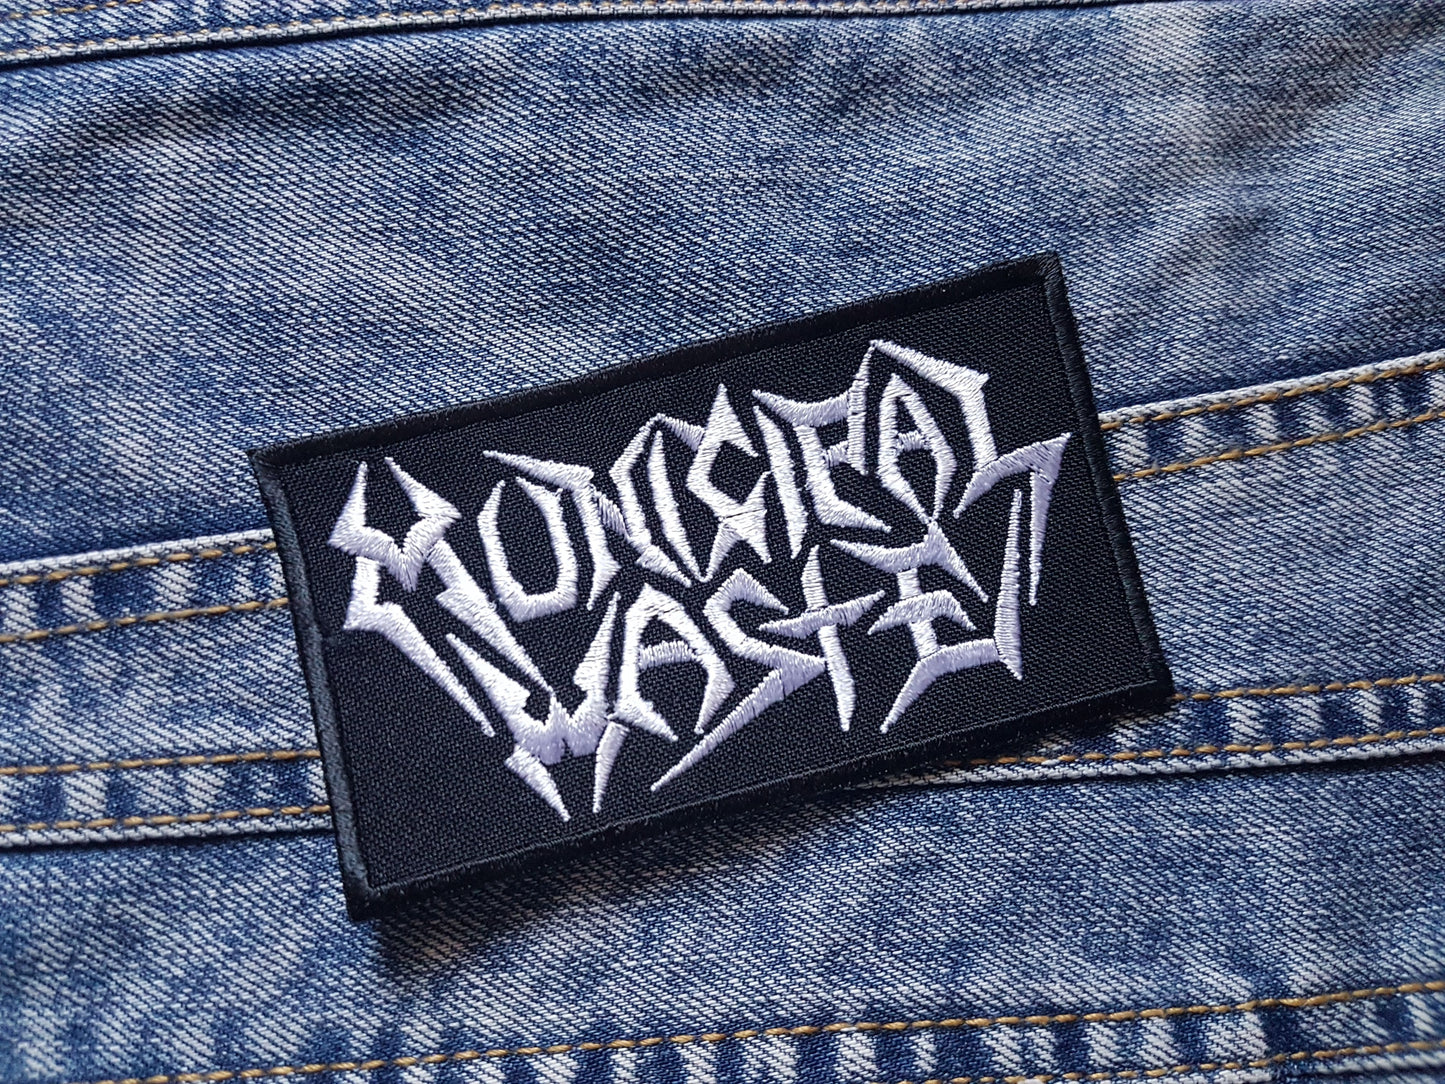 Municipal Waste Patch Embroidered